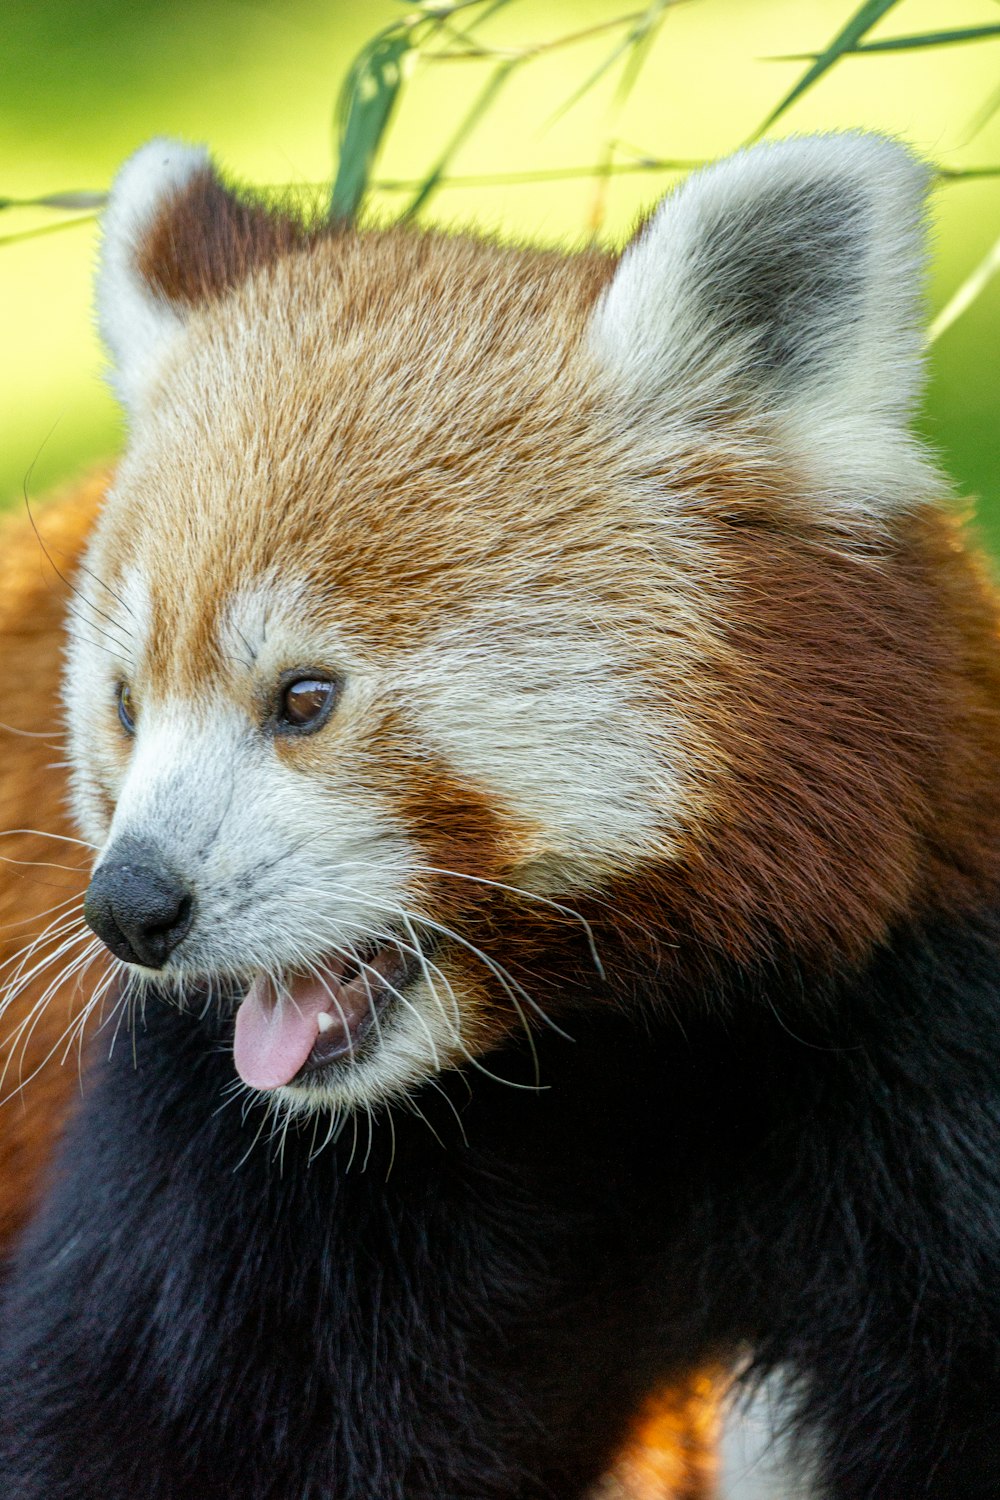 a close up of a red panda bear near a wire fence